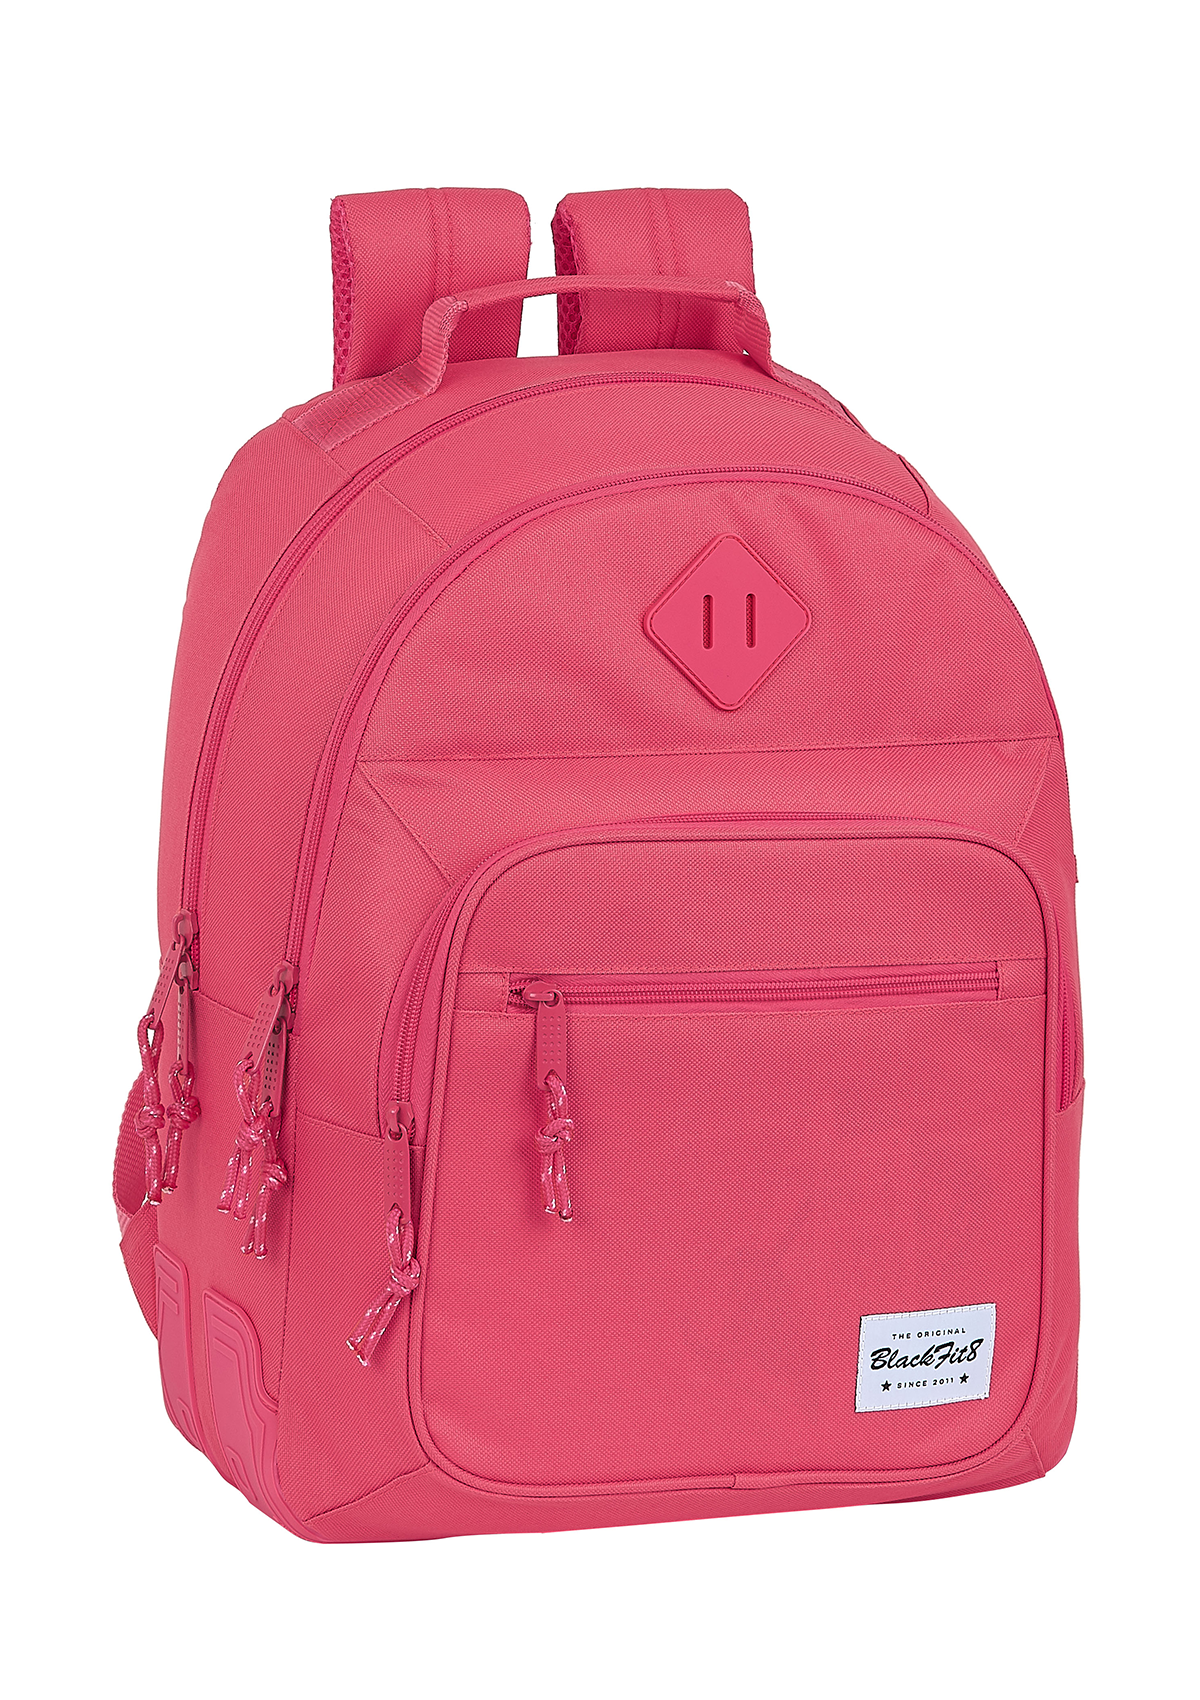 Blackfit8 Double Pink Large Backpack